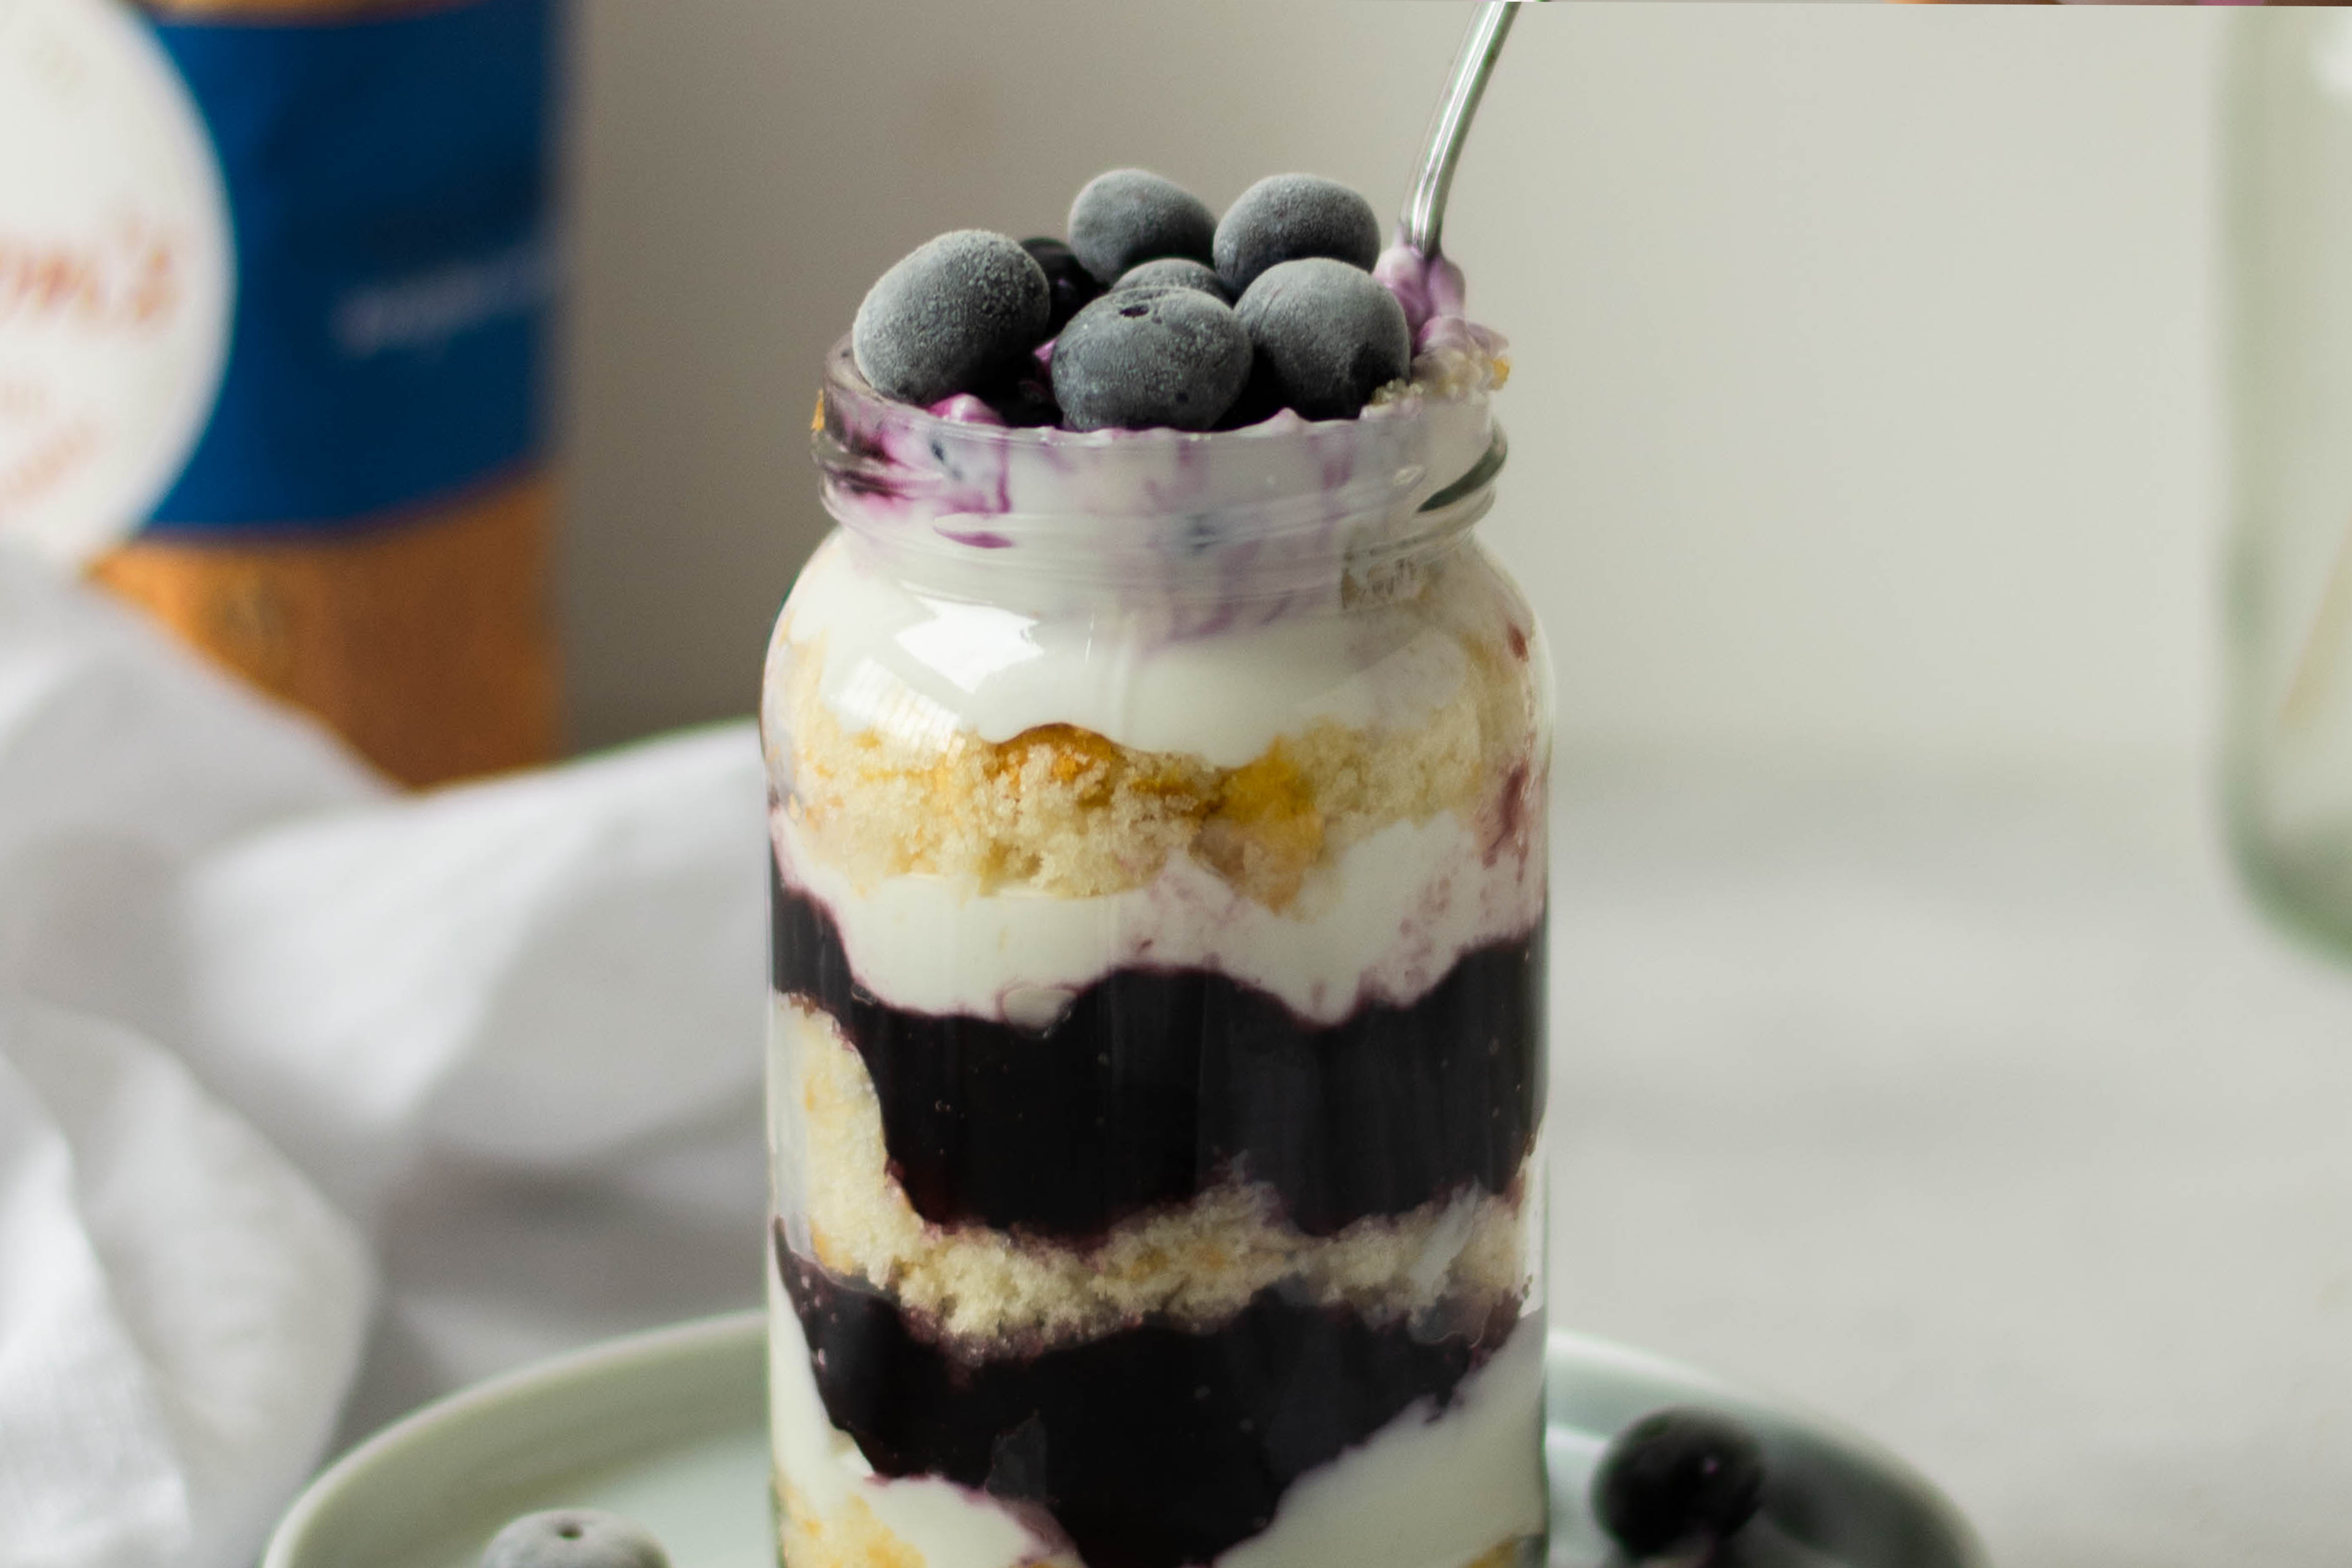 Close up of Lemon & Blueberry Cake Jar with blueberries on the top, with a spoon dipped in to take a mouthful